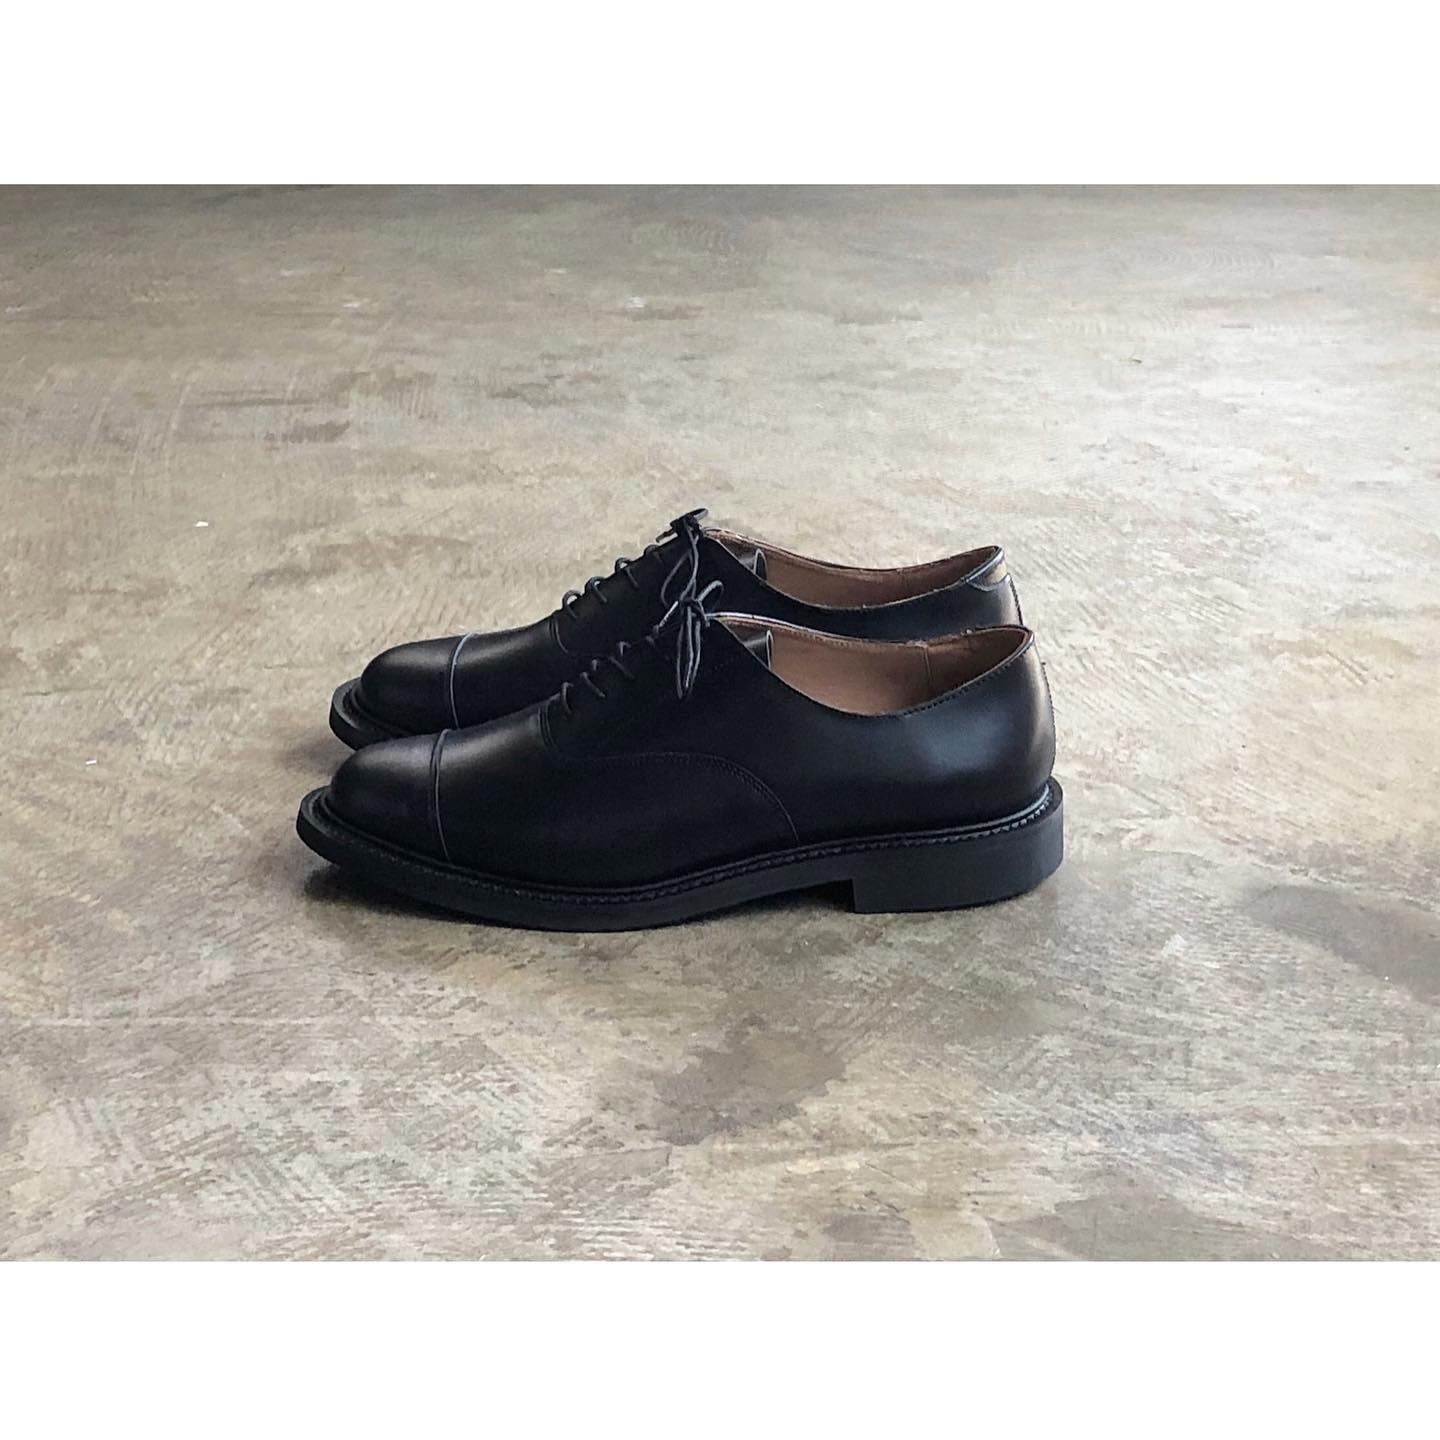 NPS(エヌピーエス) Officer Oxford Dainite Hi Shine Shoes | AUTHENTIC Life Store